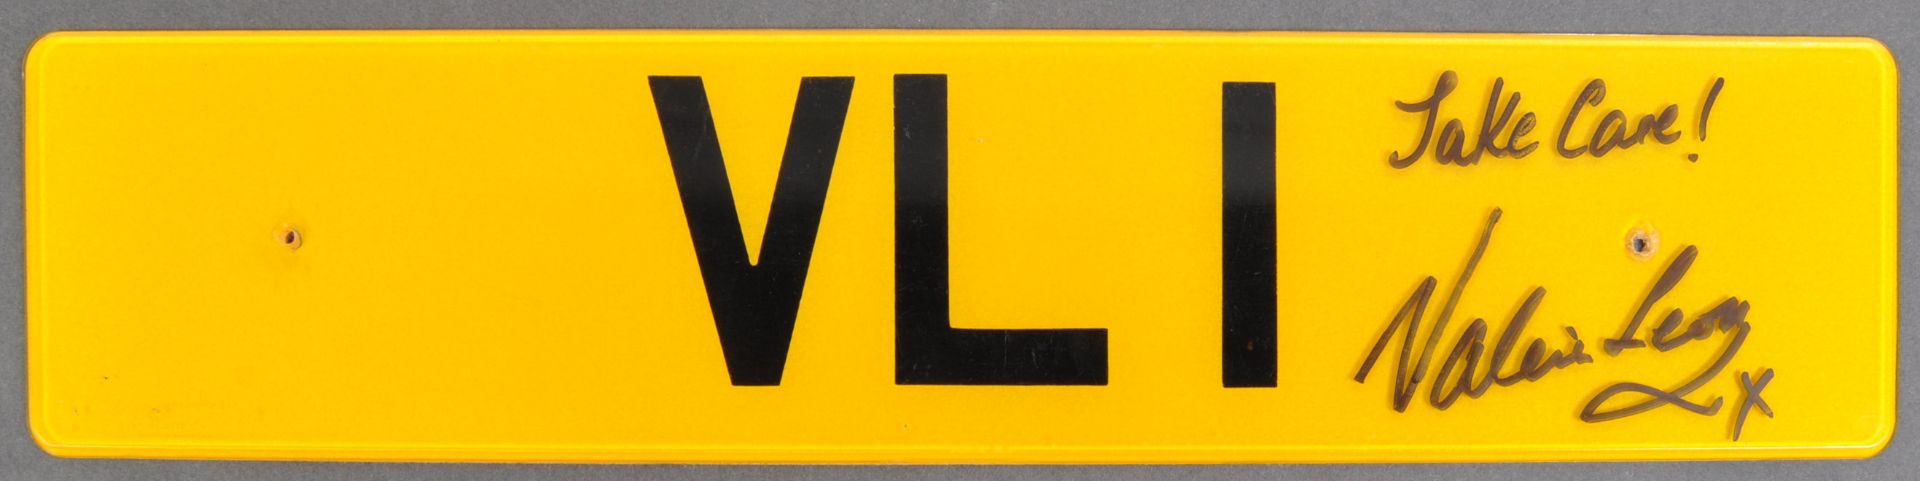 COLLECTION OF VALERIE LEON - MS LEON'S PERSONAL NUMBERPLATE